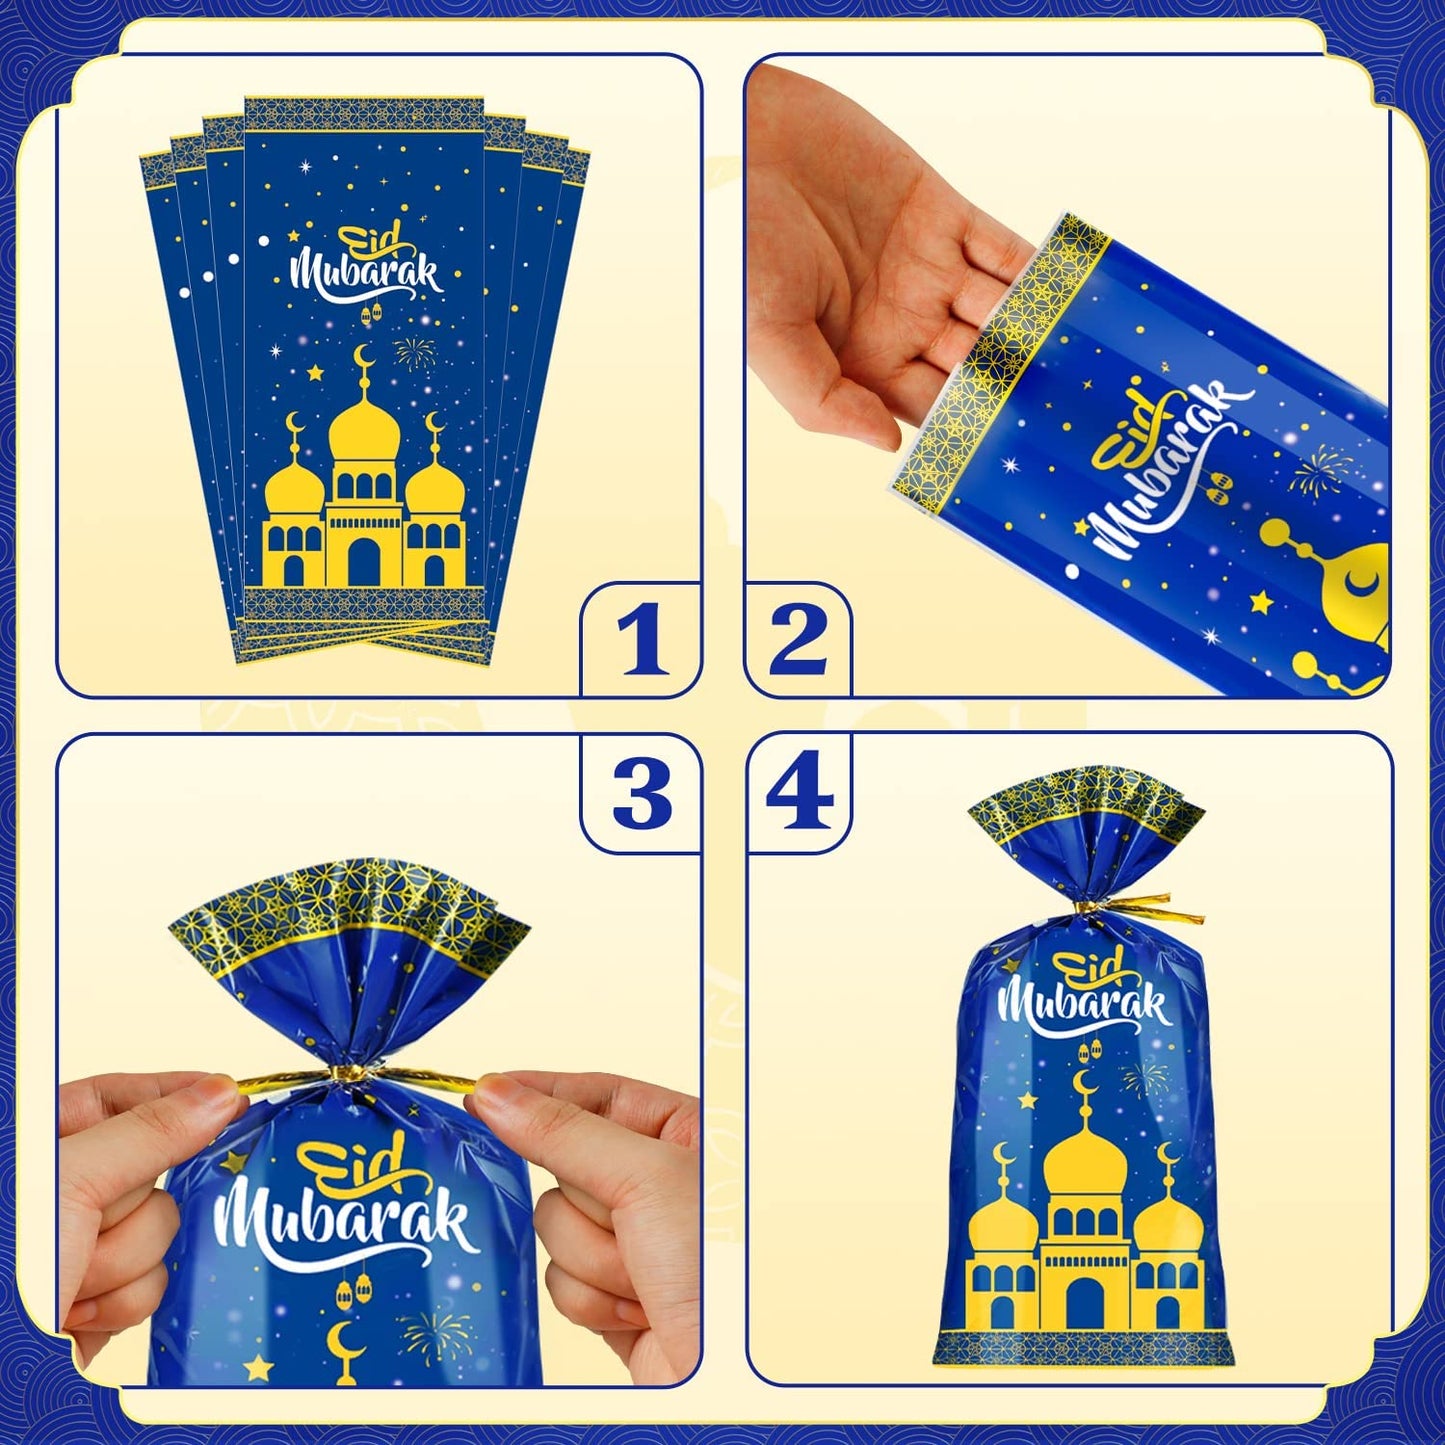 120 Pieces Eid Mubarak Party Treat Bags, Ramadan Gifts Bags for Kids, Eid Goodie Bags Halal Chocolate Dates Sweet Bag Eid Favours Presents Cellophane for Women Family Men Girls(2 Patterns with Ties)